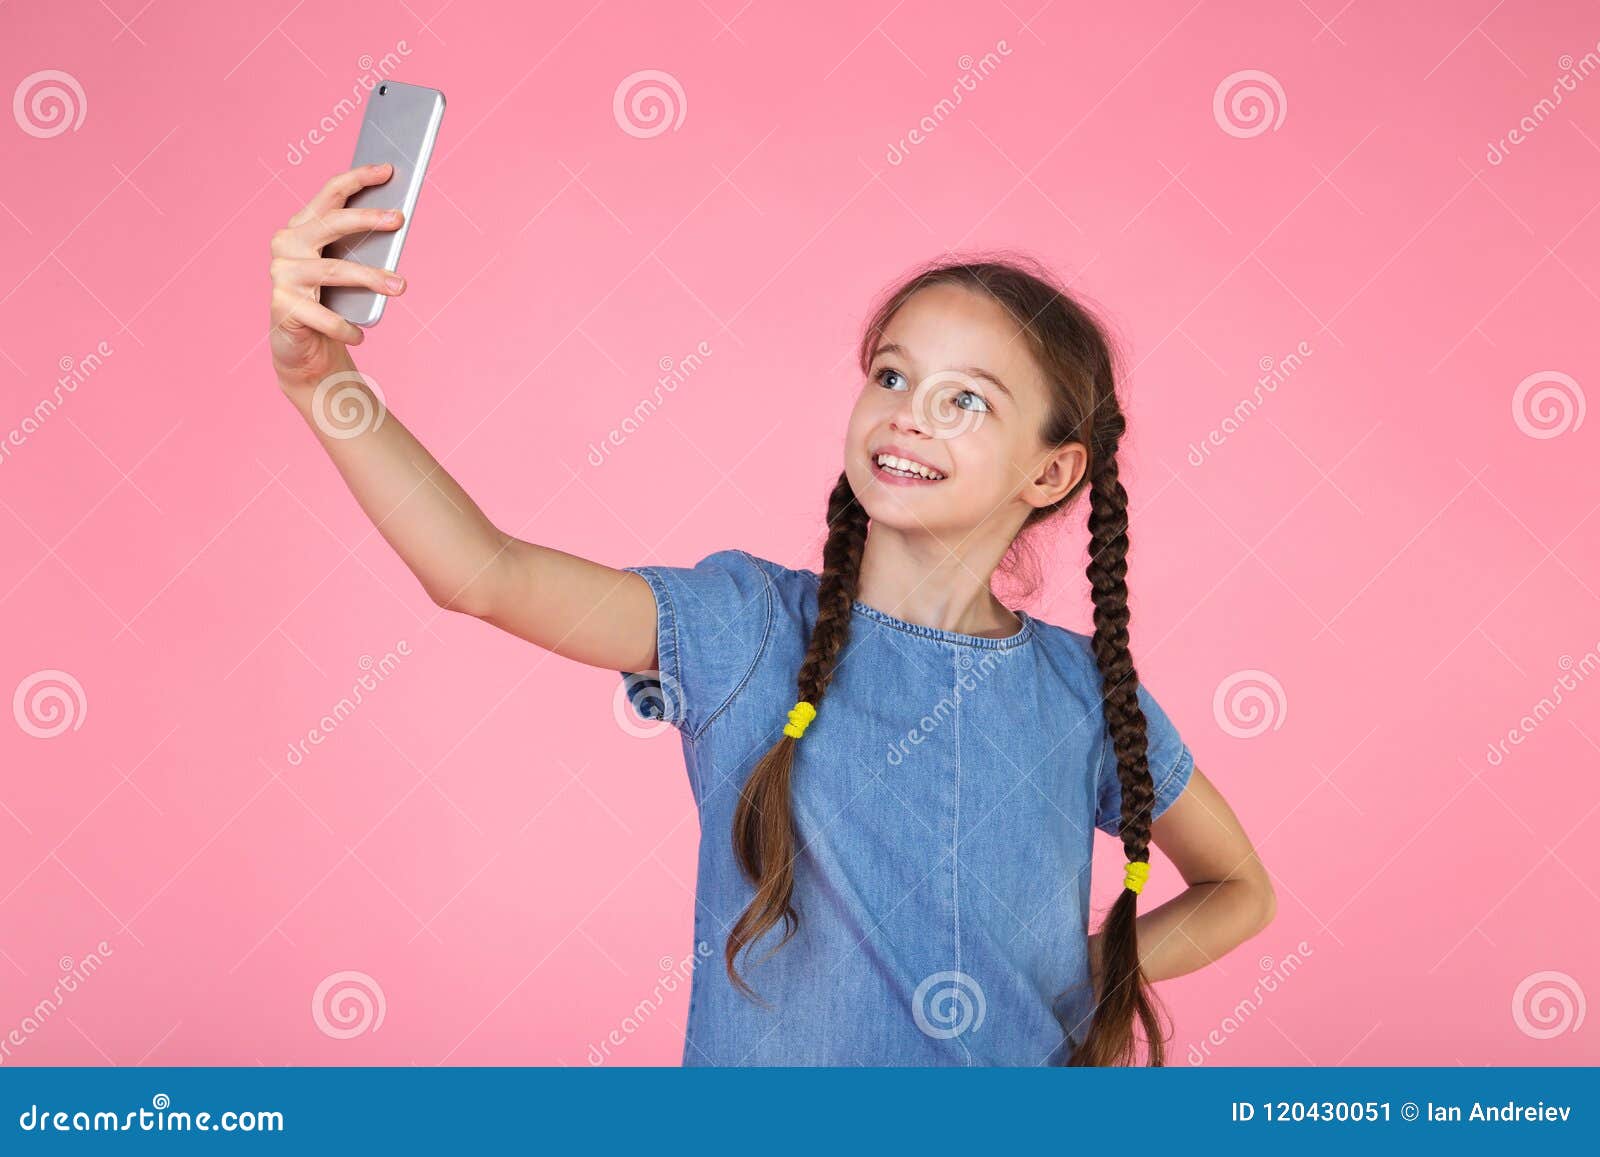 Young girl in denim dress stock image. Image of attractive - 120430051